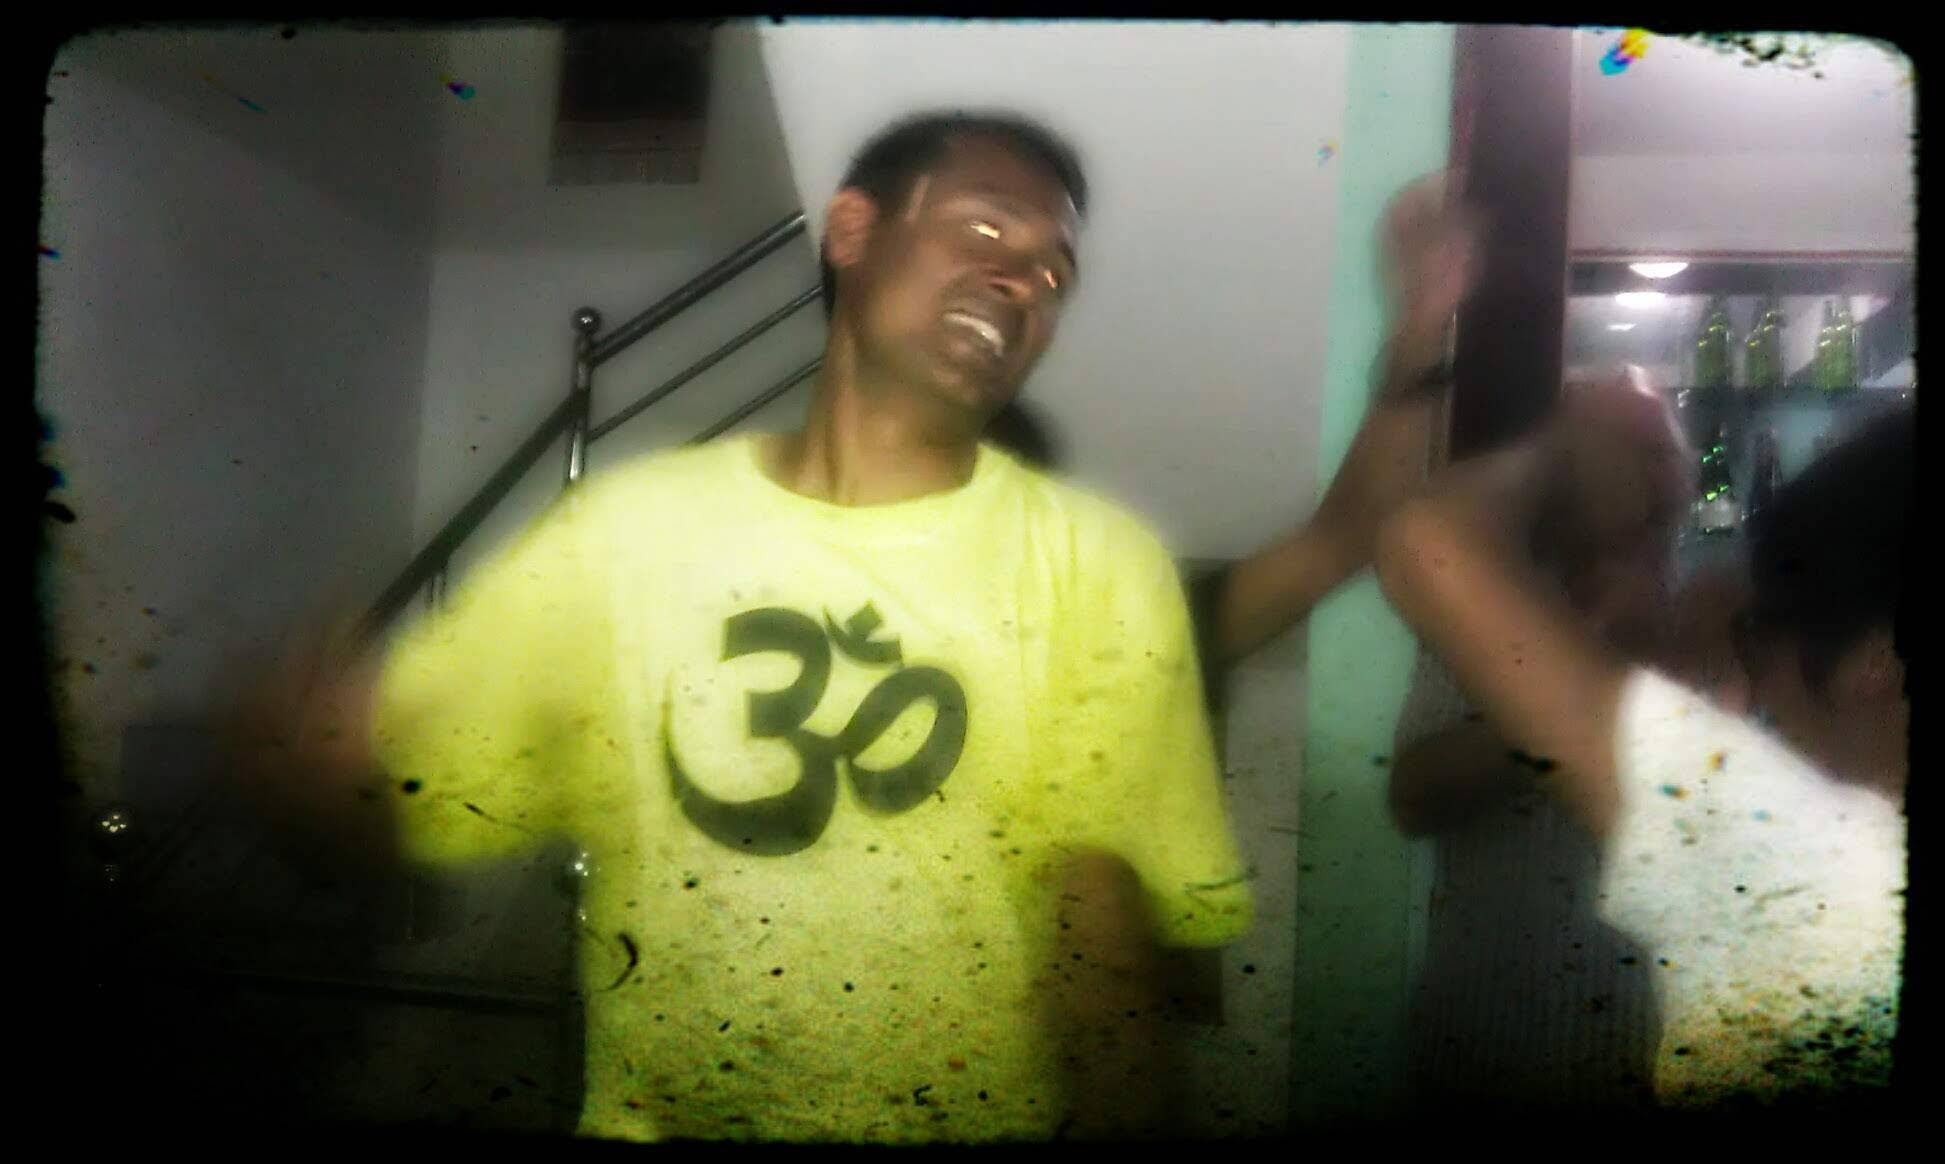 Dancing sherpa: The ”30” on his shirt means not thirty, it means ”om”: ॐ